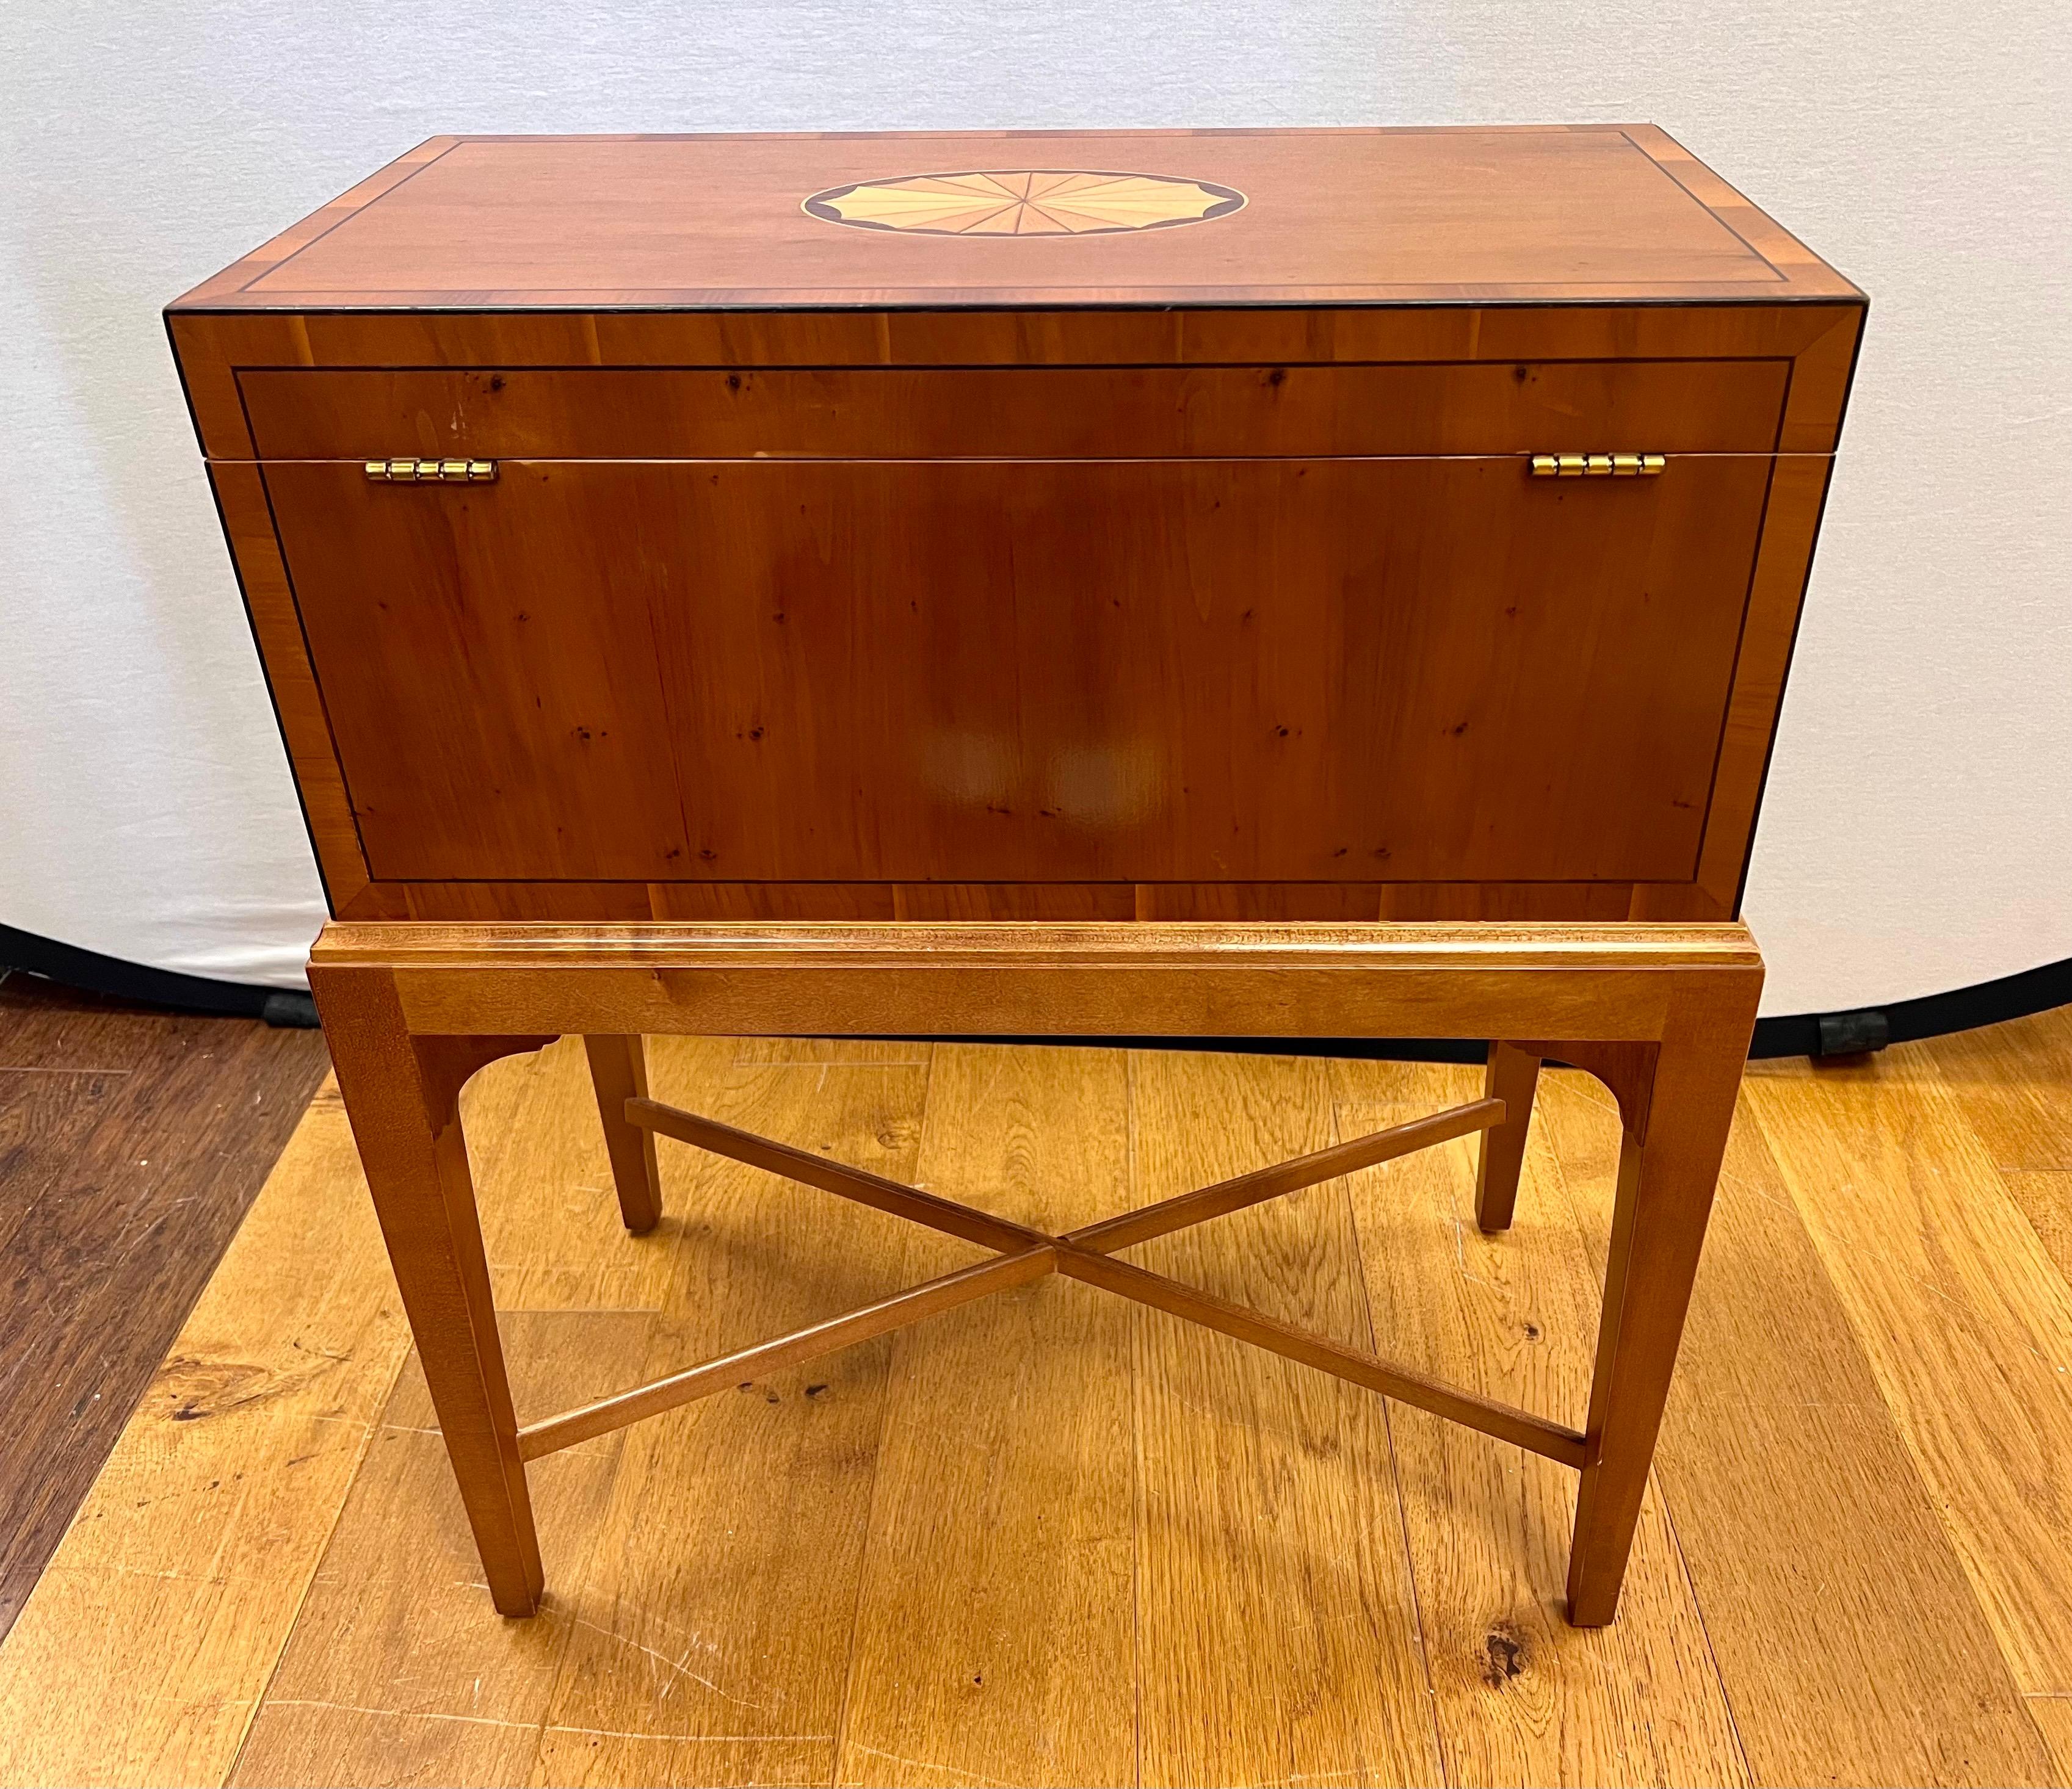 Baker Furniture Mahogany Inlay Table with Small Chest Box on Stand for Storage 5